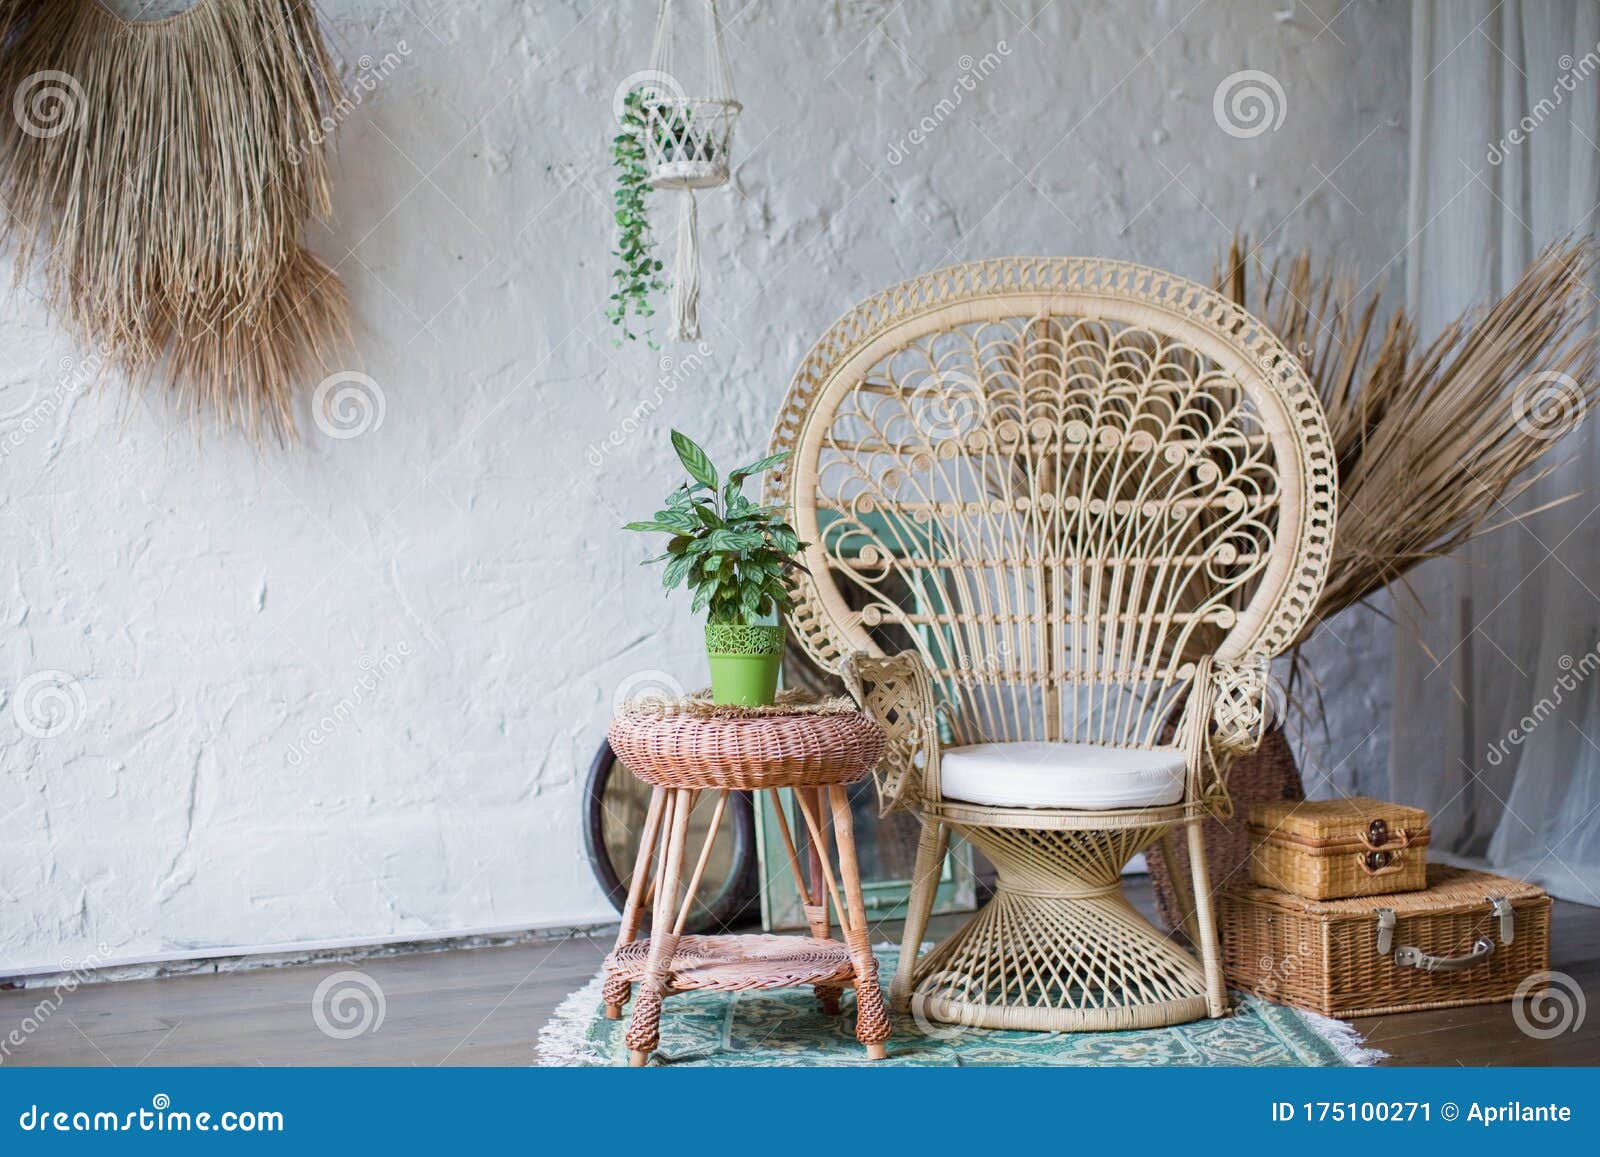 rattan peacock chair in loft room with boho decorations